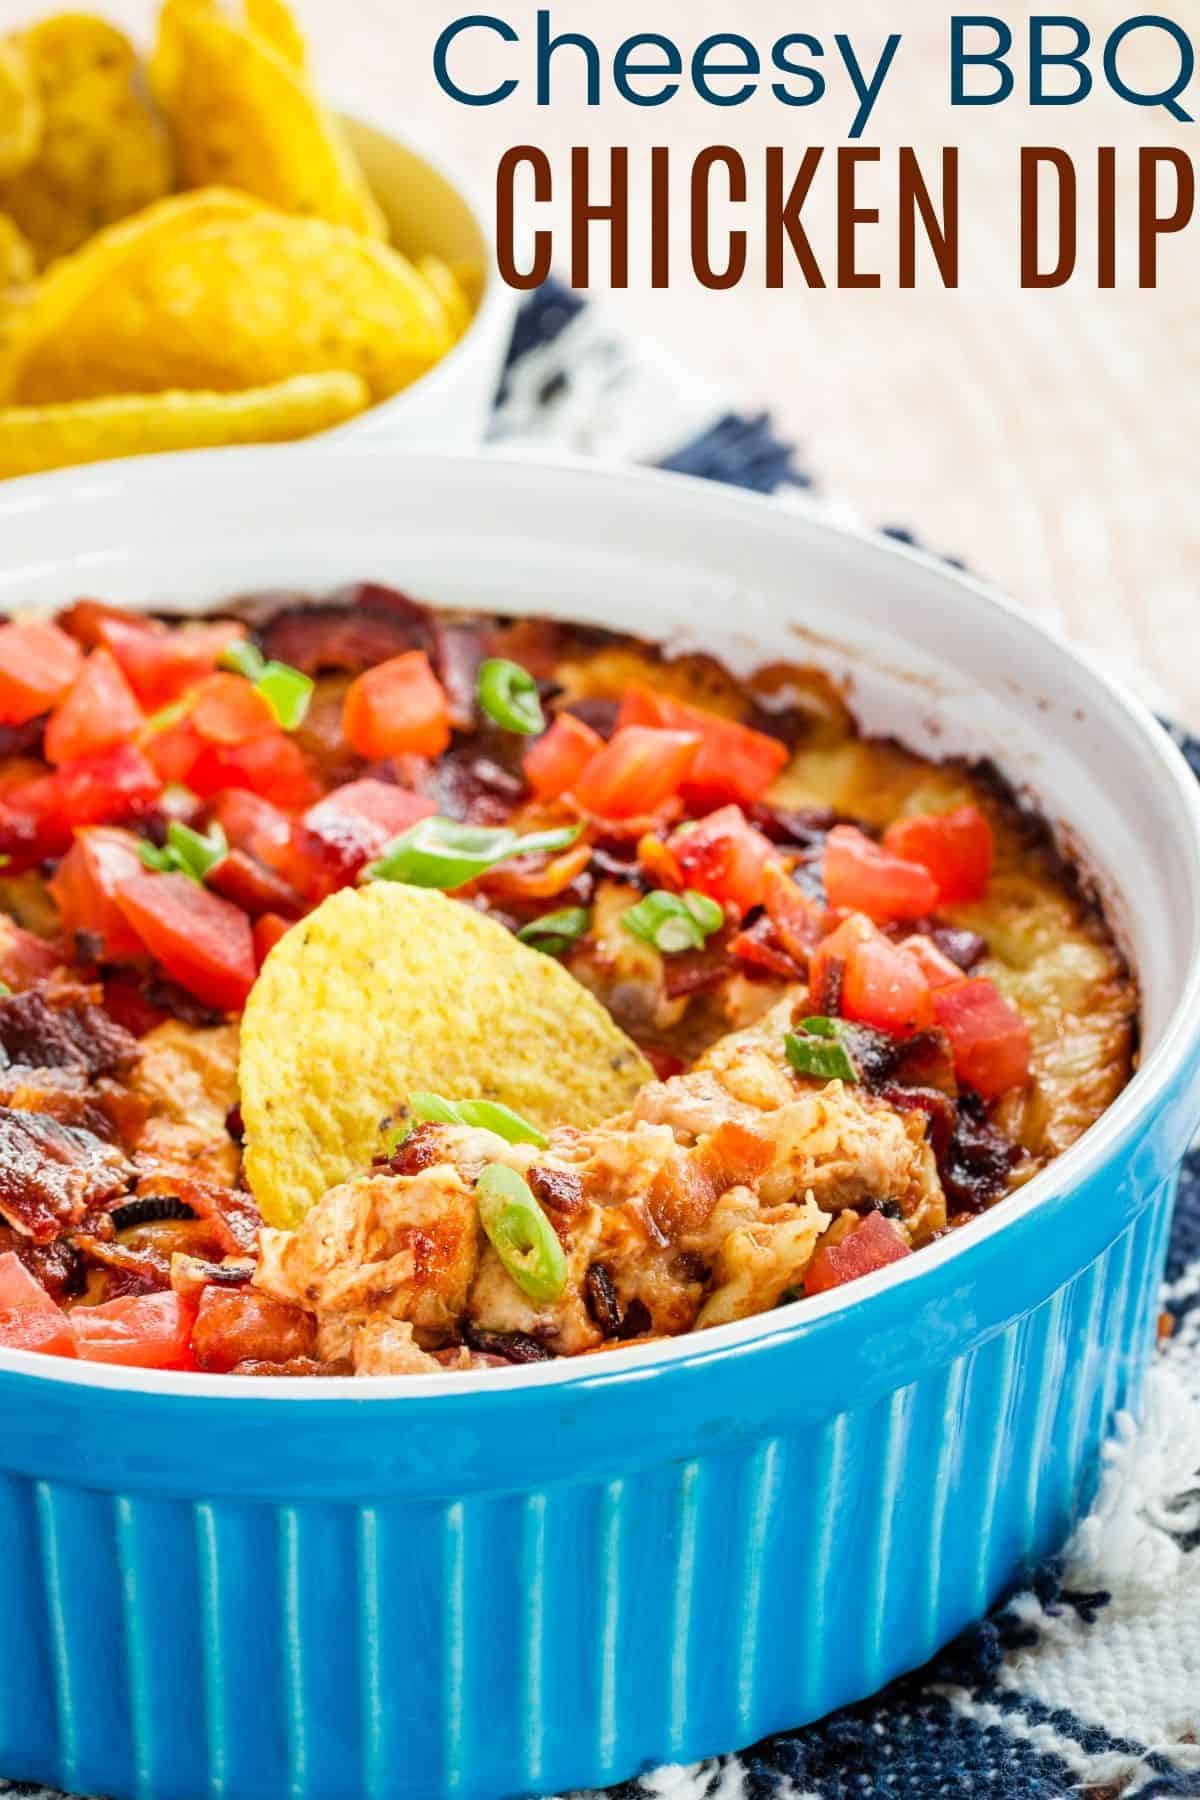 Blue casserole dish filled with Barbecue Chicken dip topped with bacon and tomatoes